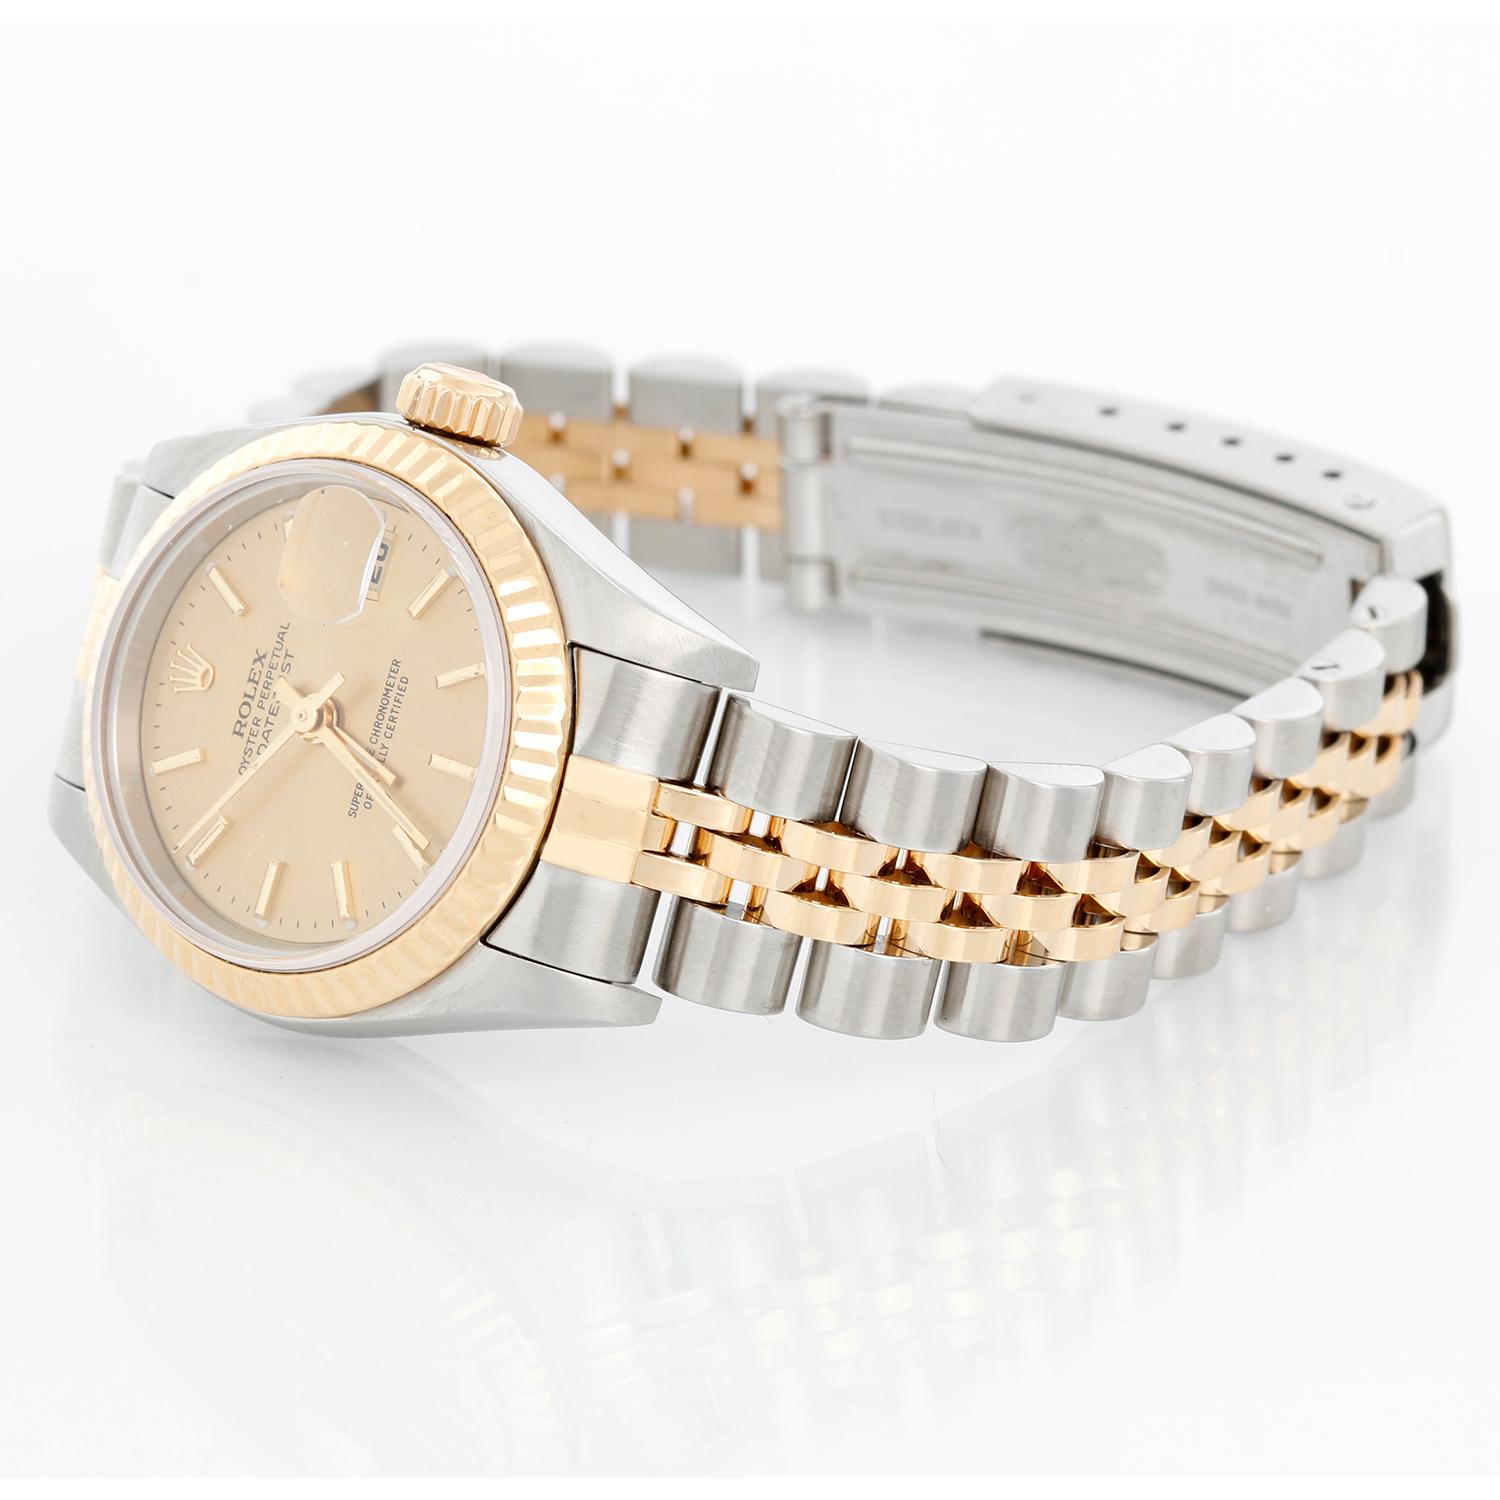 Rolex  Datejust 2-tone Steel & Gold Ladies Watch 79173 - Automatic winding, 29 jewels, Quickset date, sapphire crystal. Stainless steel case with 18k yellow gold fluted bezel (26mm diameter). Silver dial with stick hour markers. Stainless steel and